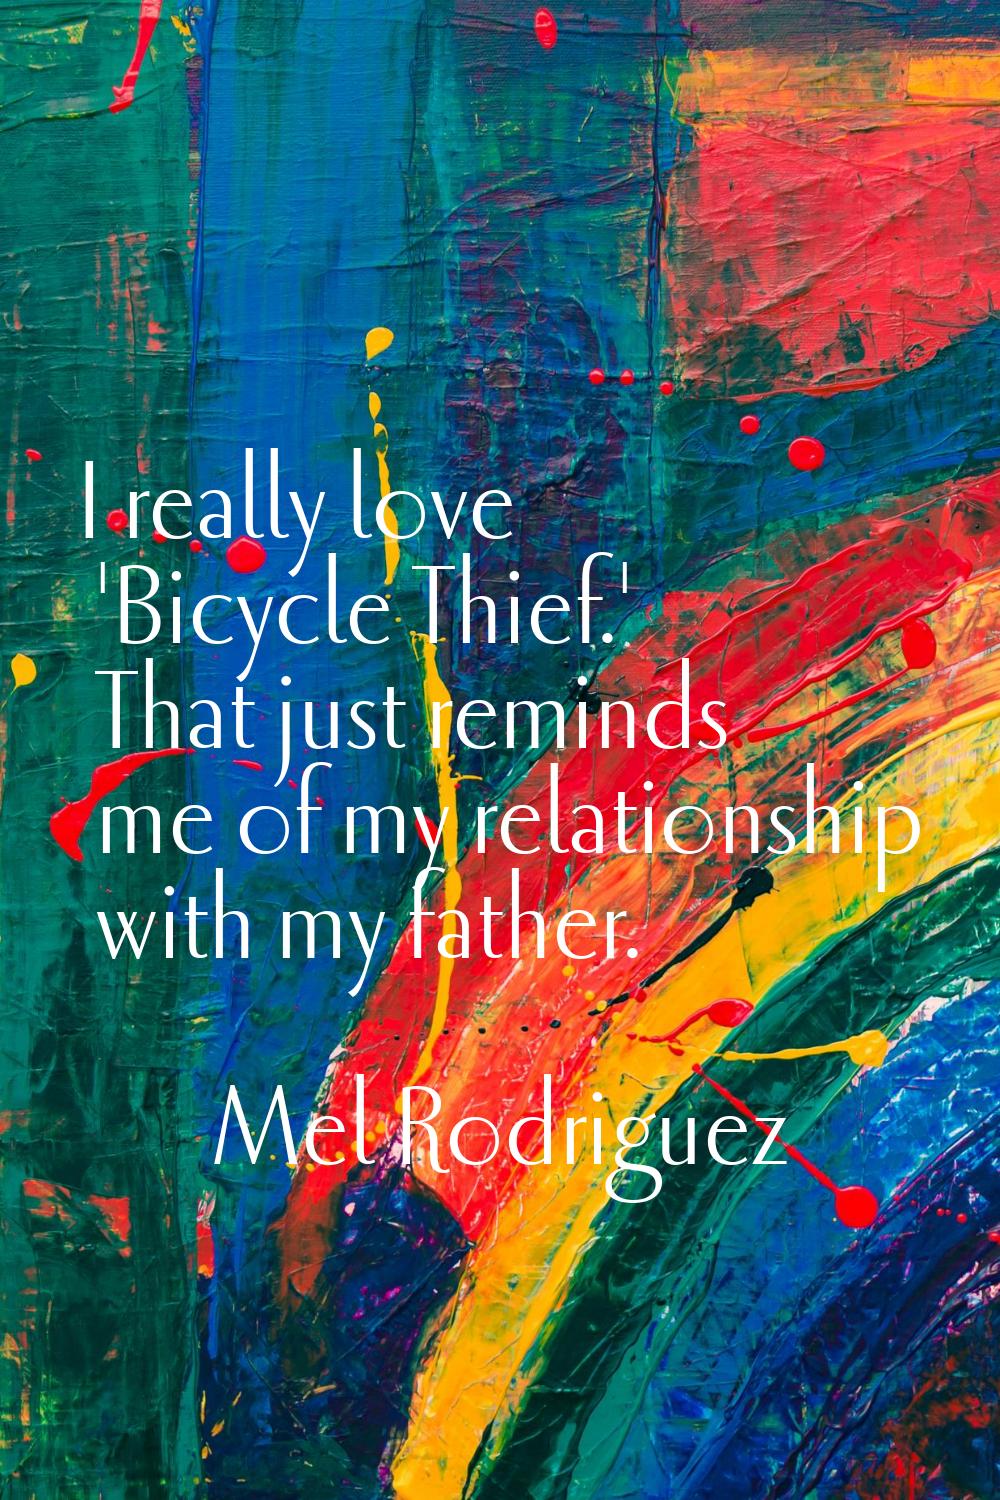 I really love 'Bicycle Thief.' That just reminds me of my relationship with my father.